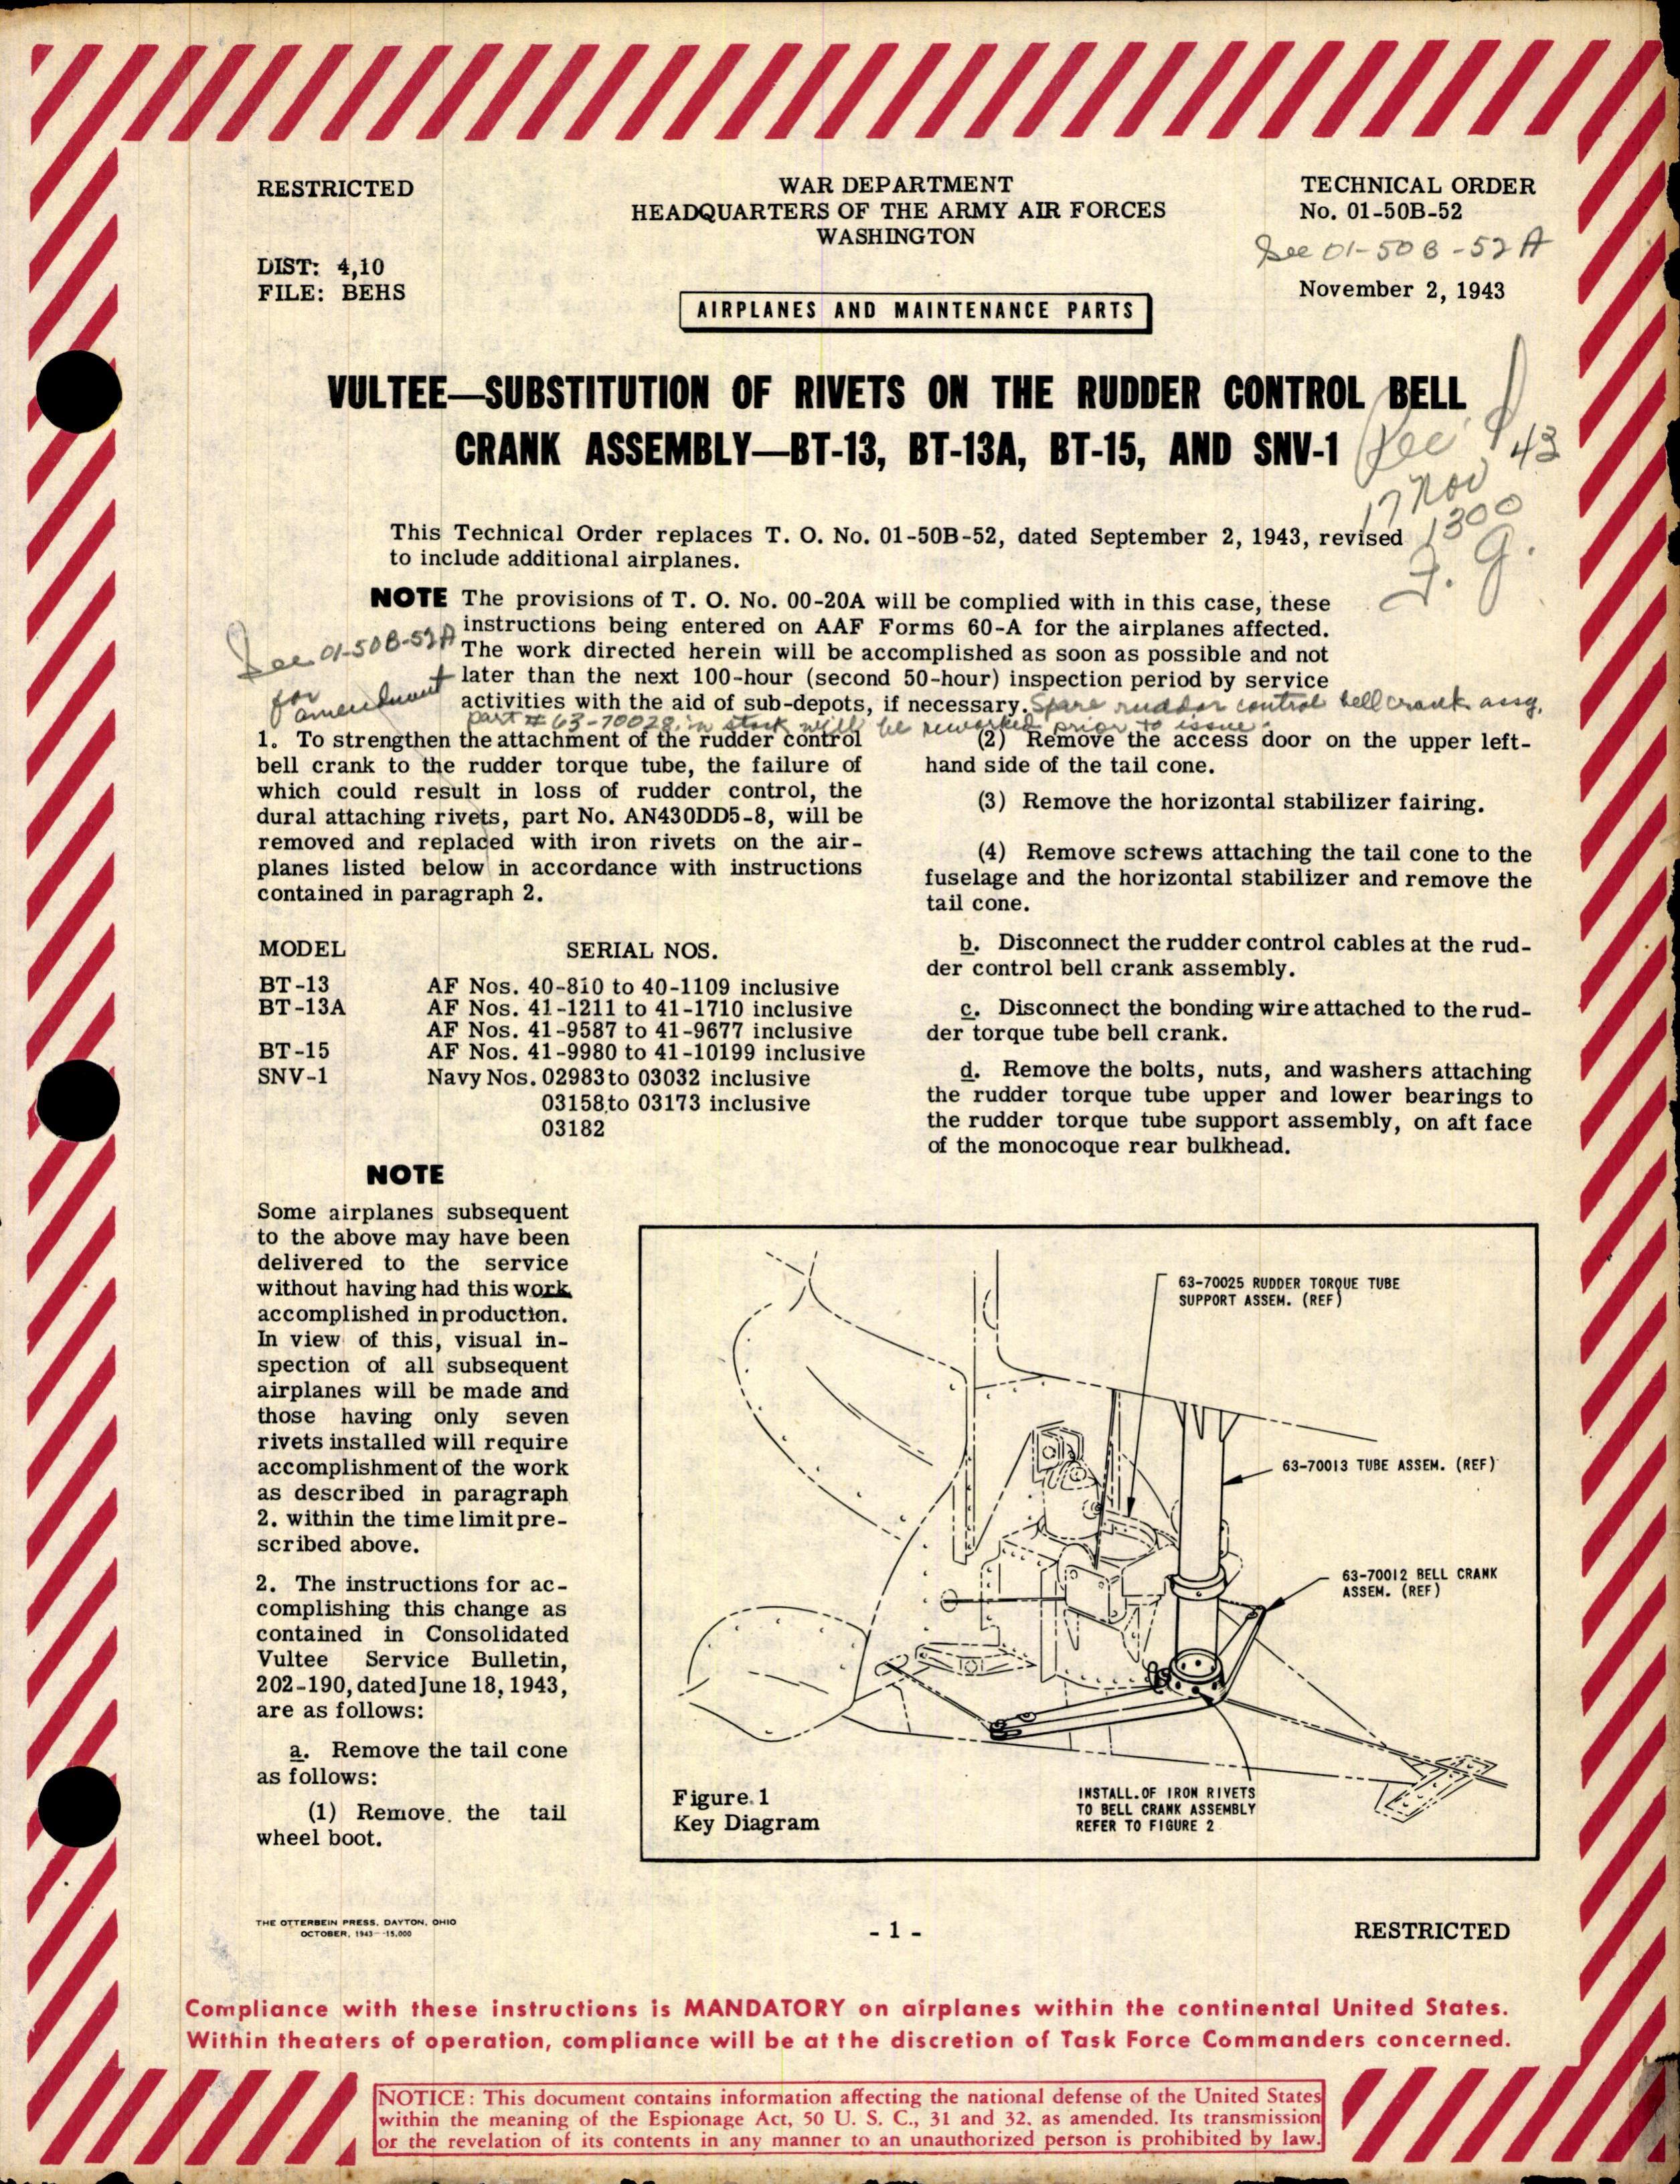 Sample page 1 from AirCorps Library document: Substitution of Rivets on the Rudder Control Bell Crank Assembly for BT-13, BT-13A, BT-15, and SNV-1